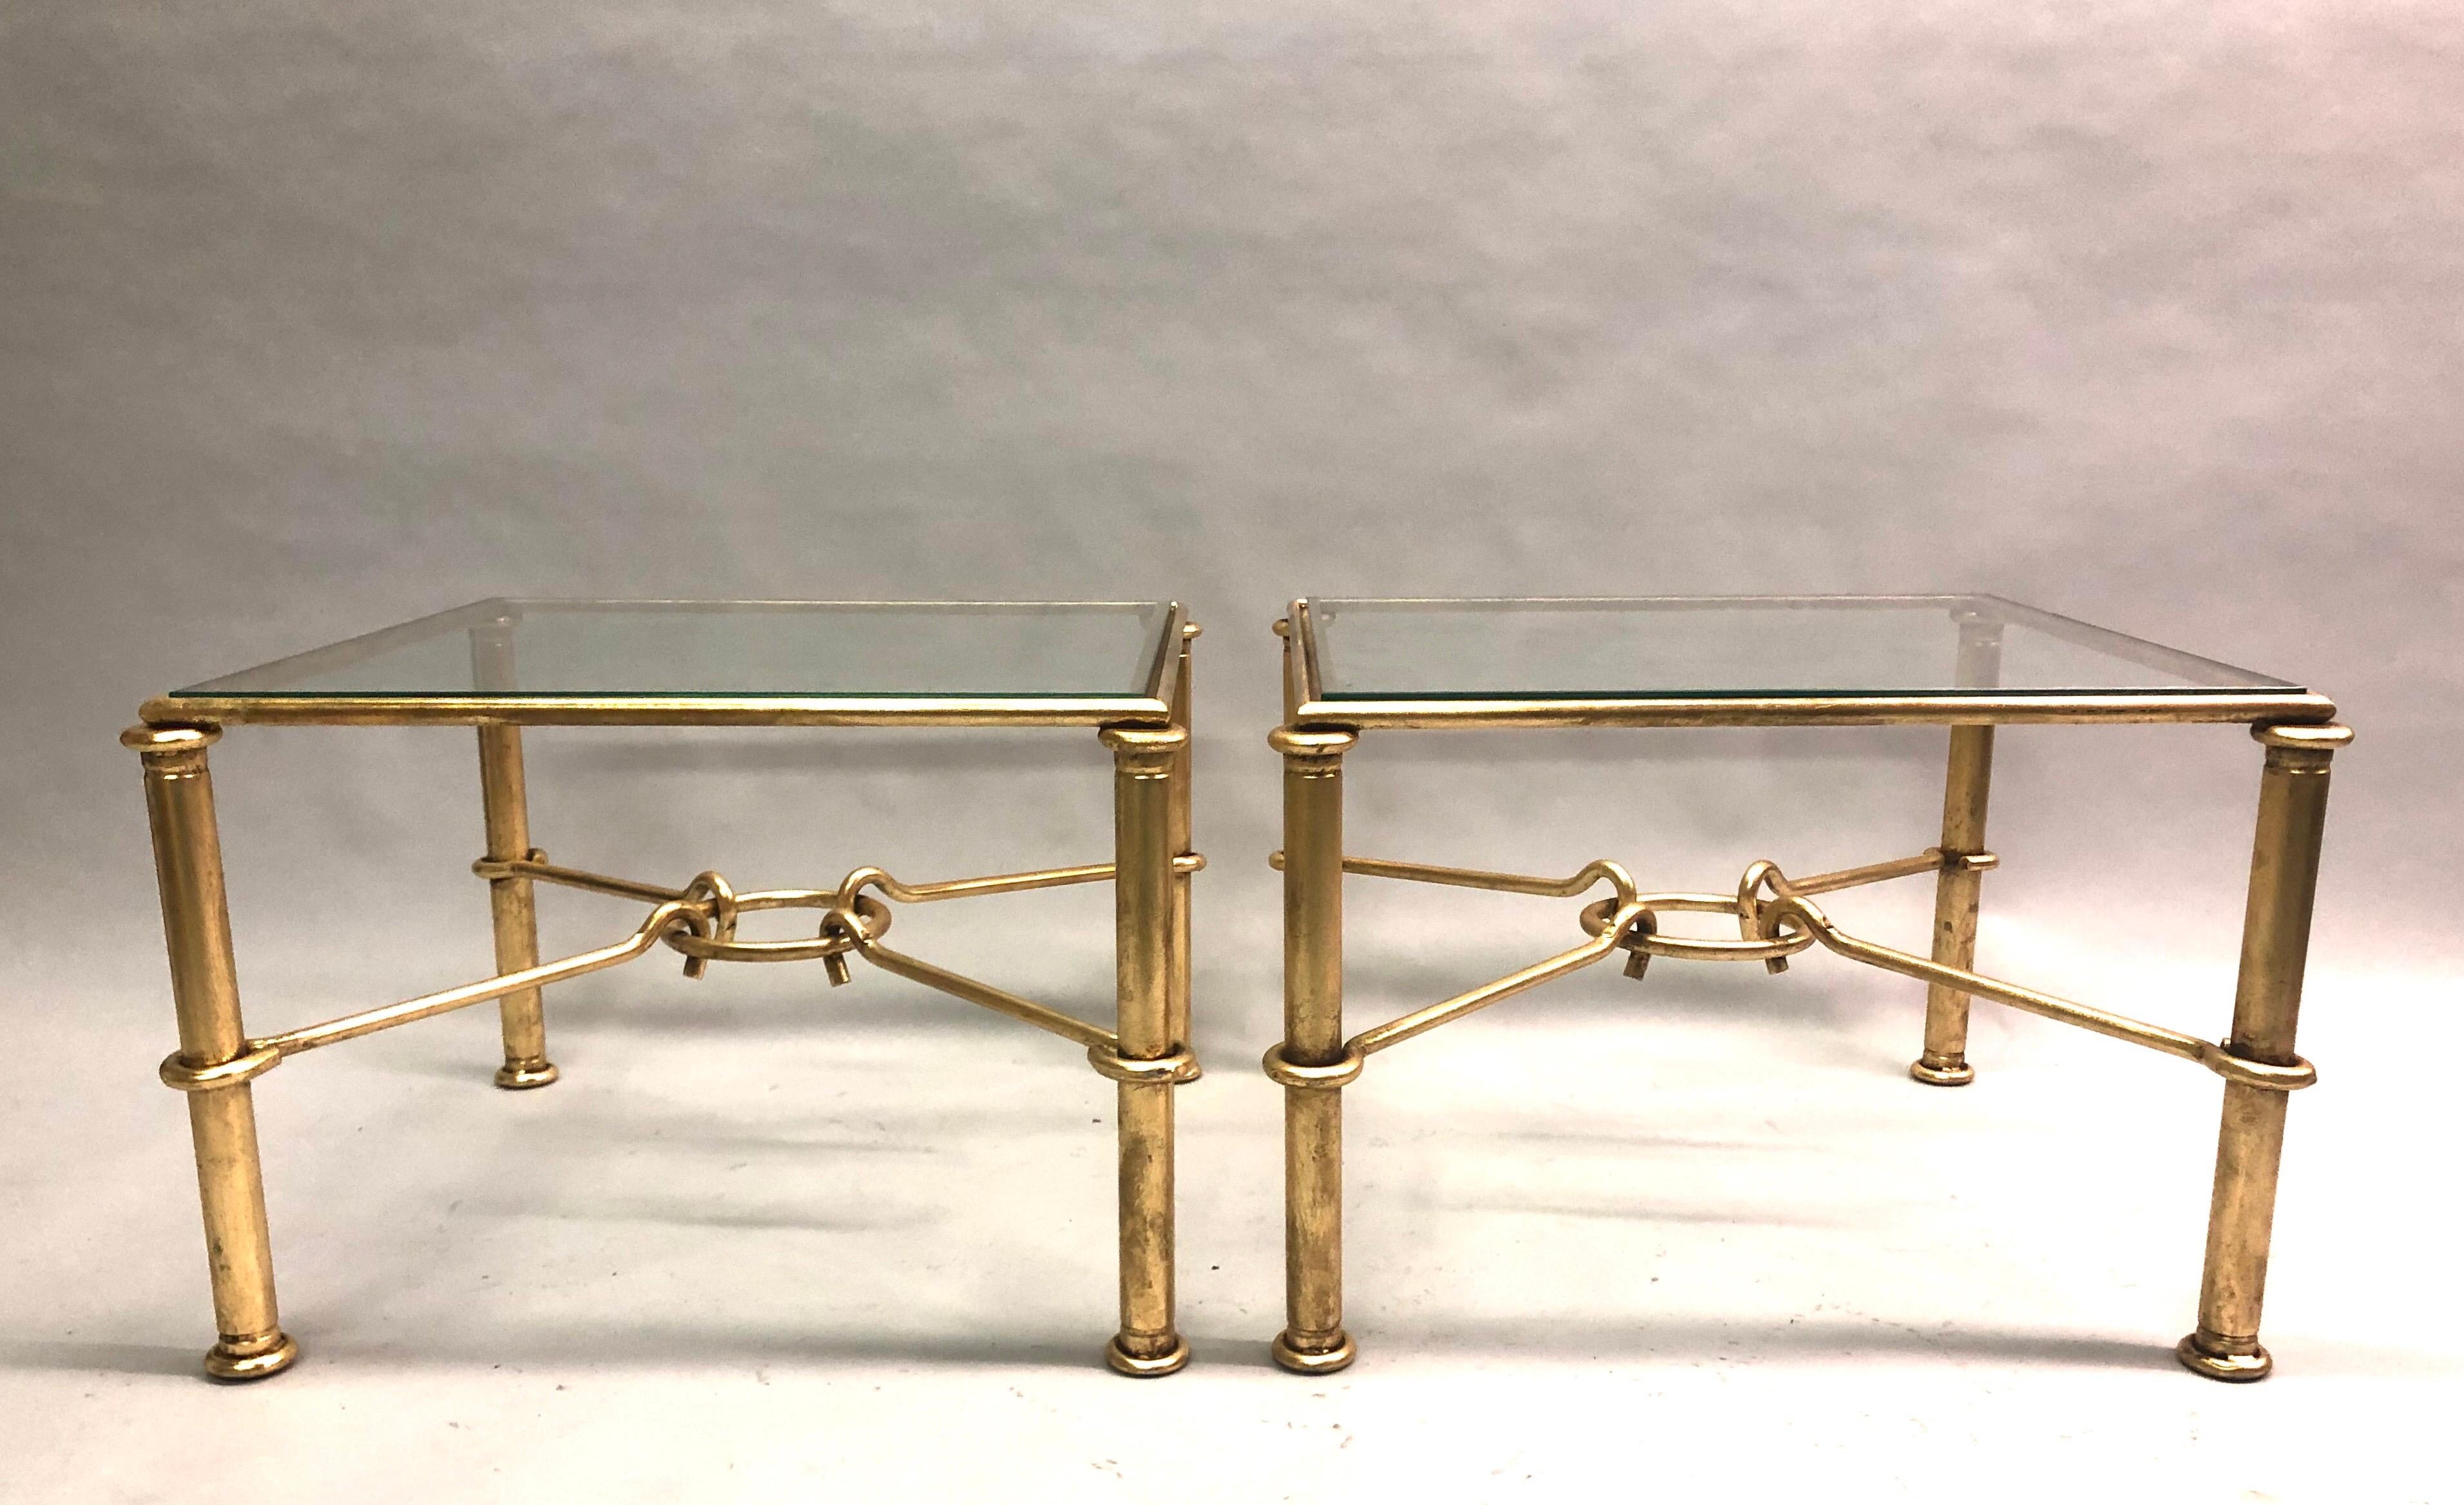 Elegant, timeless pair of Italian Mid-Century Modern neoclassical gilt iron side or end tables by the sculptor or designer, Giovanni Banci for Hermes. The pieces are also designed to fit together as a coffee or cocktail table and have Classic Hermes